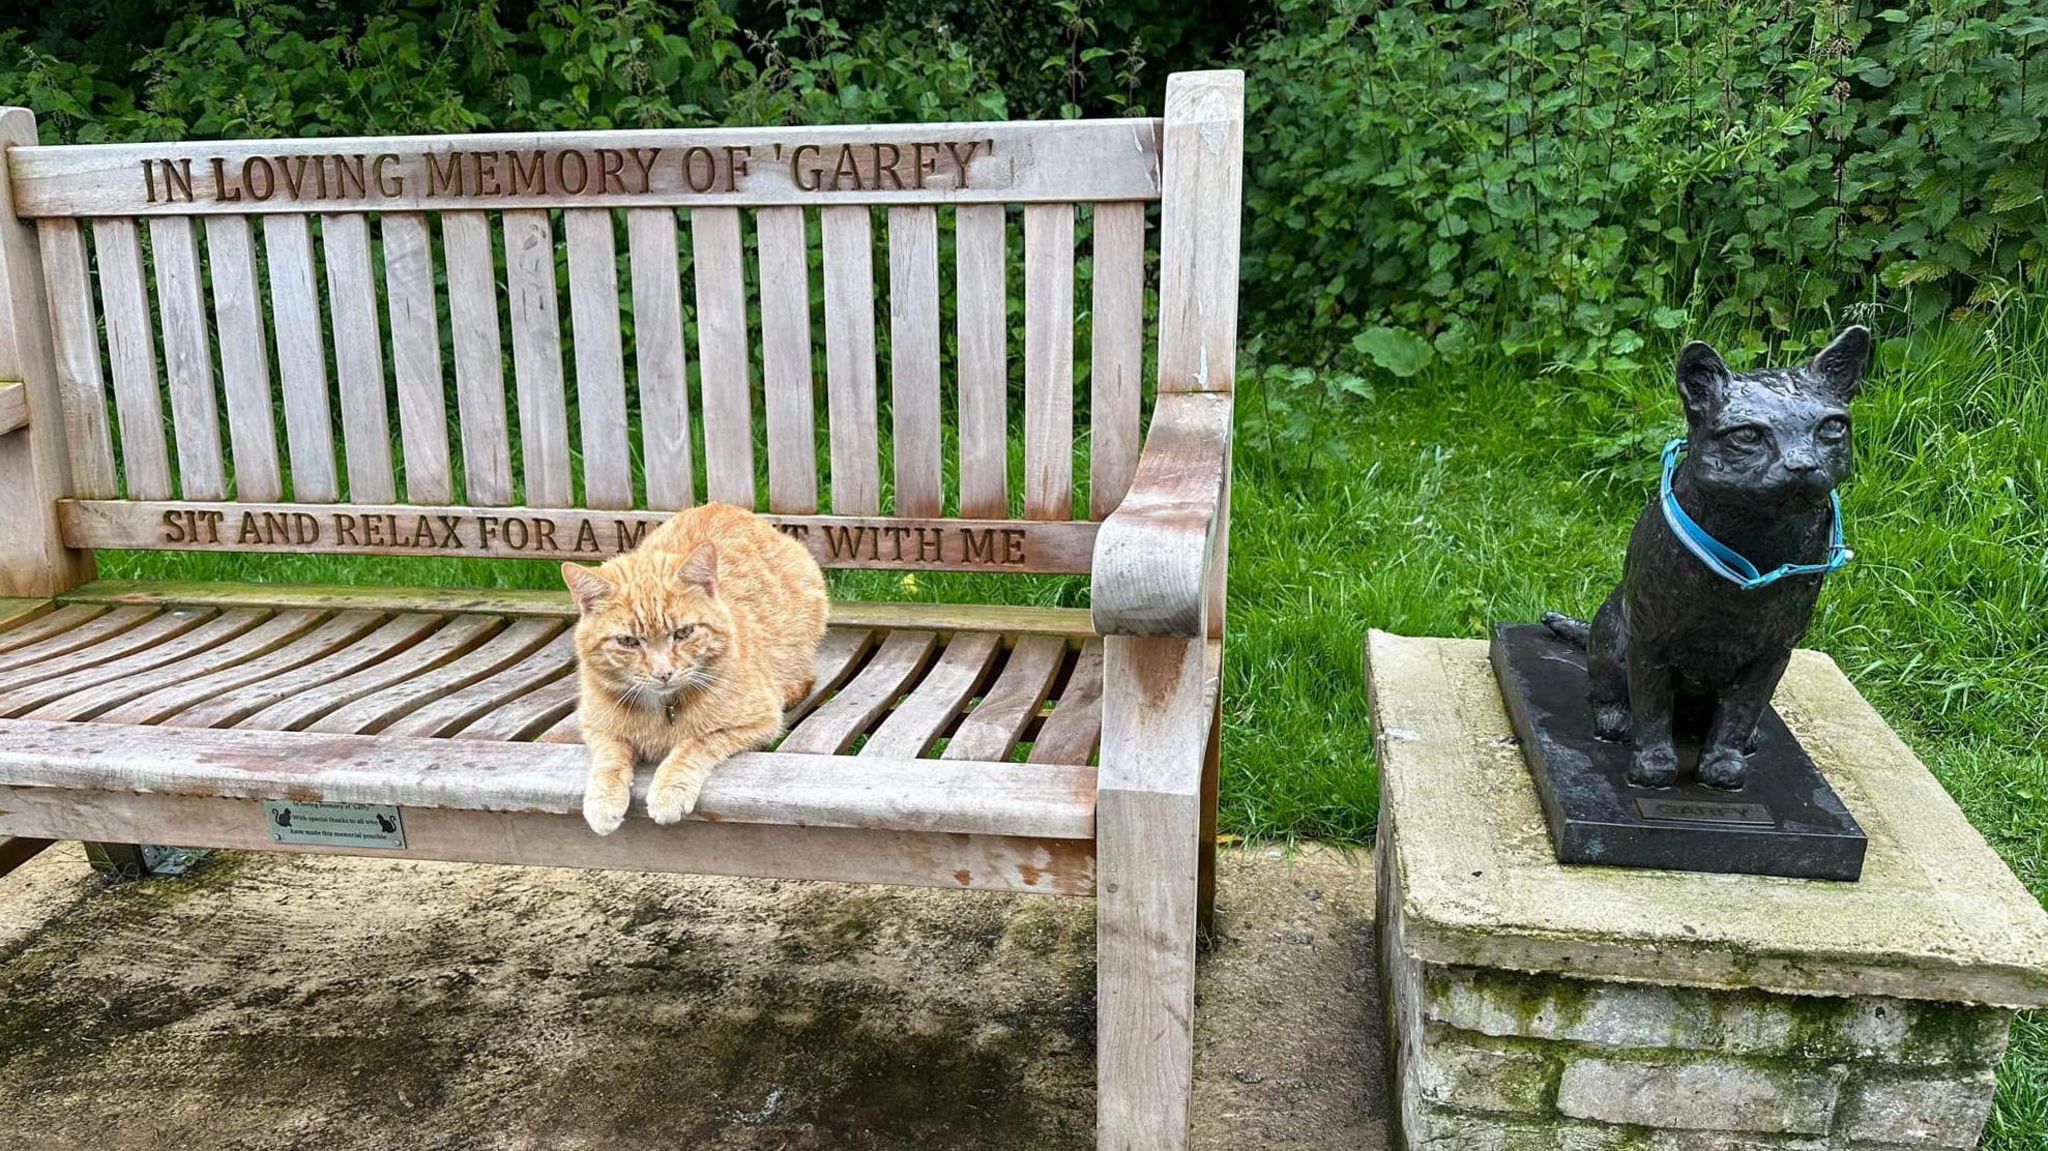 Teddy the cat on a bench